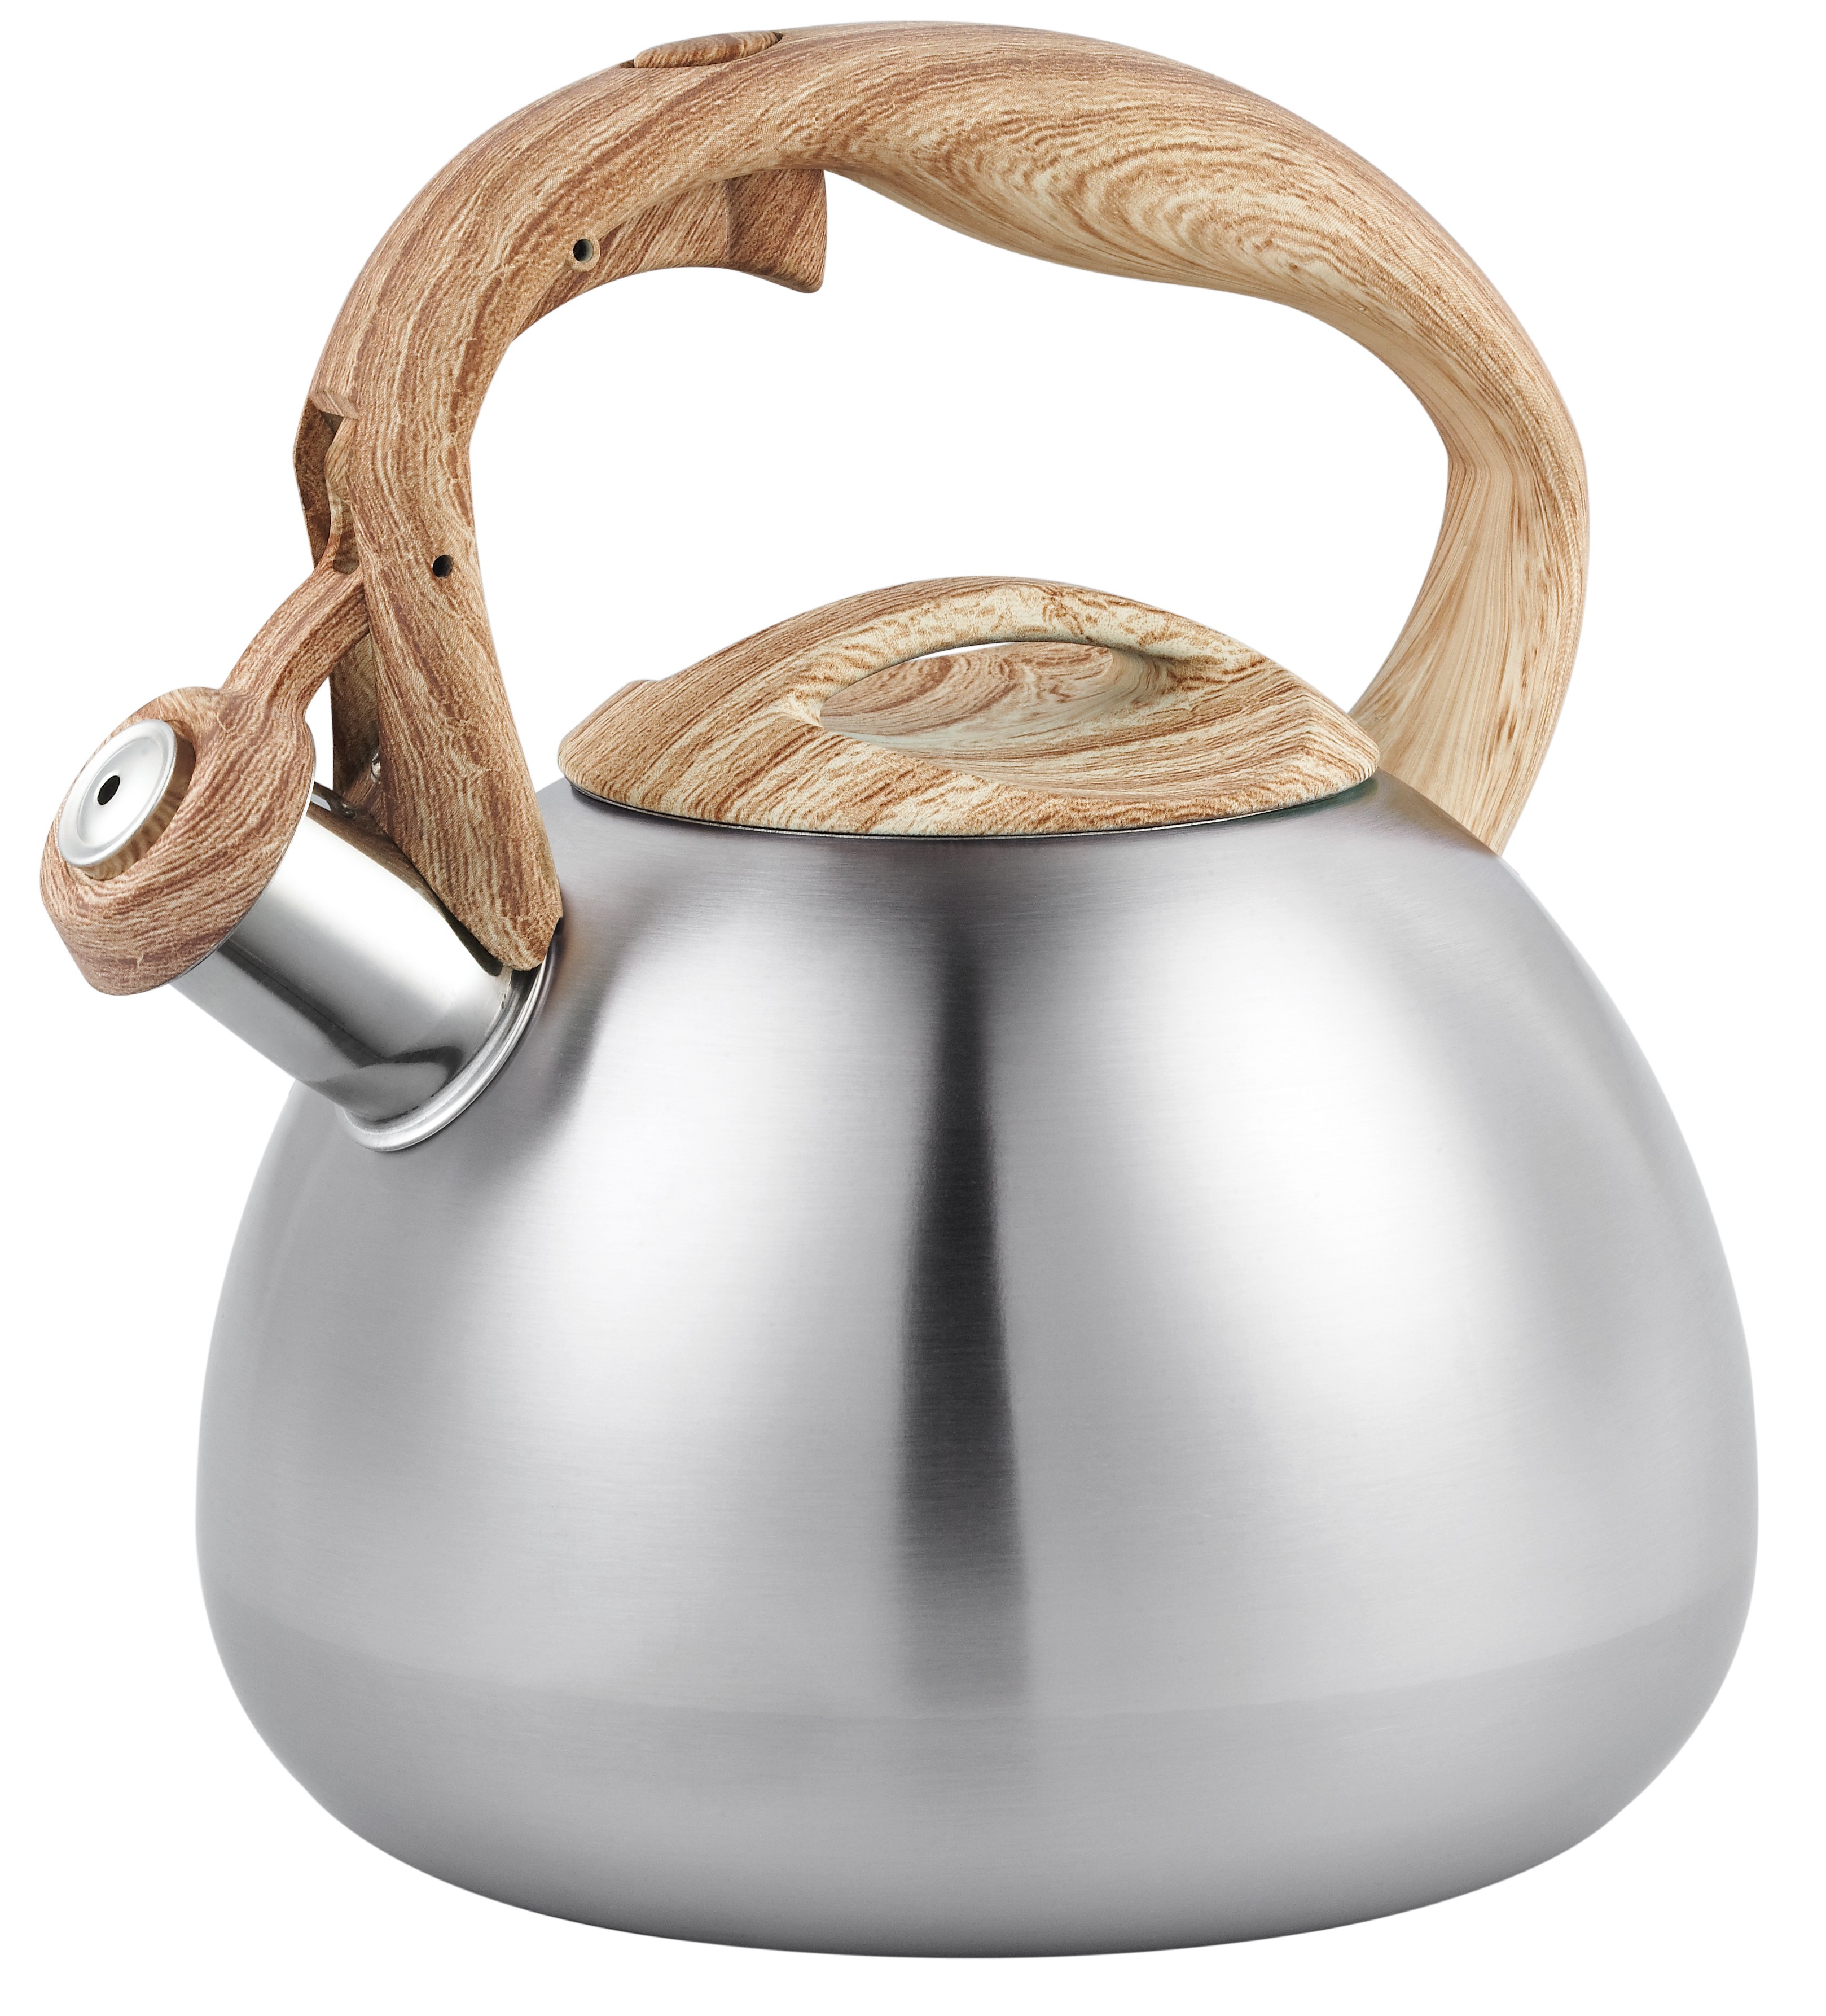 New Style Stainless Steel Whistling Teapot Unique Teapot with Painted 2.8l